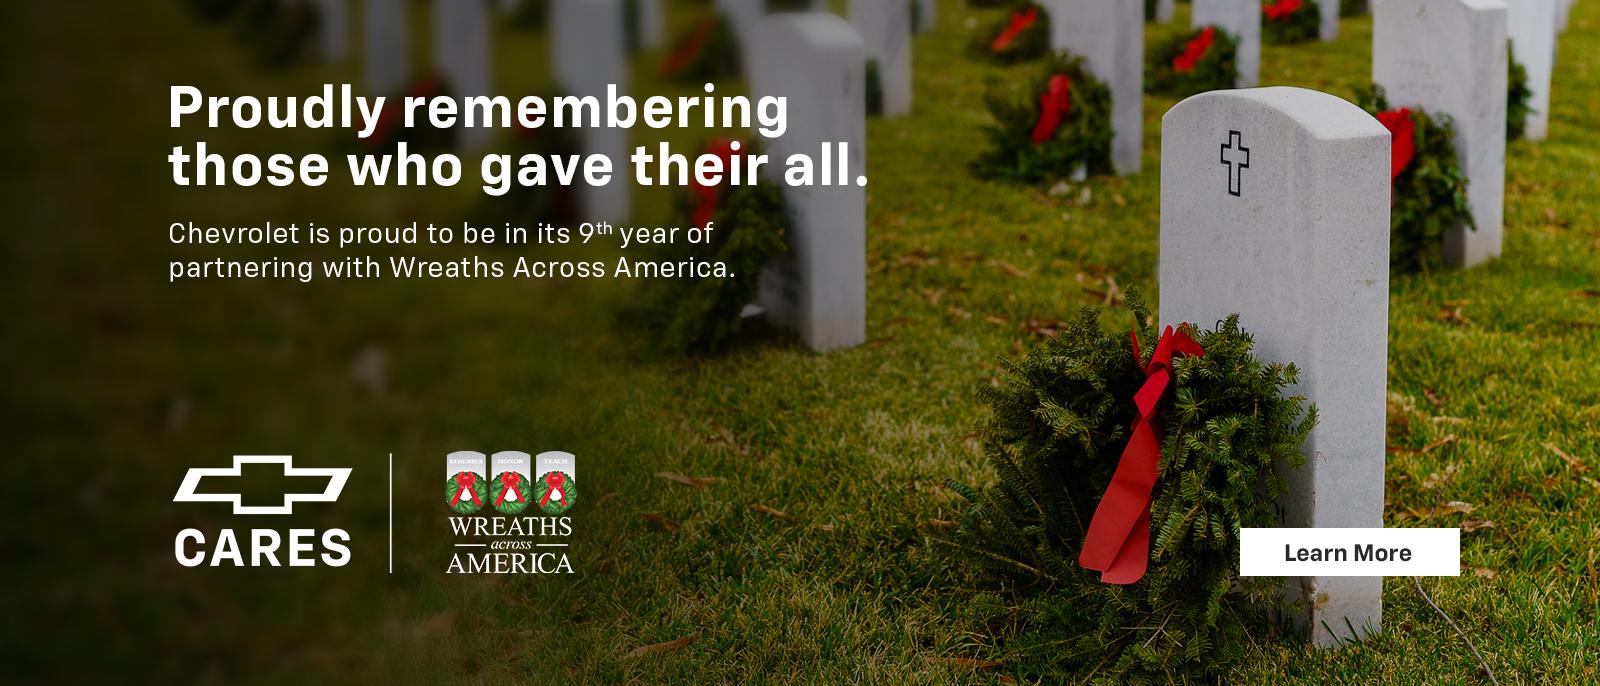 Proudly remembering those who gave their all. Chevrolet is proud to be in its 9th year of partnering with Wreaths Across America. Wreaths Across America does not endorse any product or service.